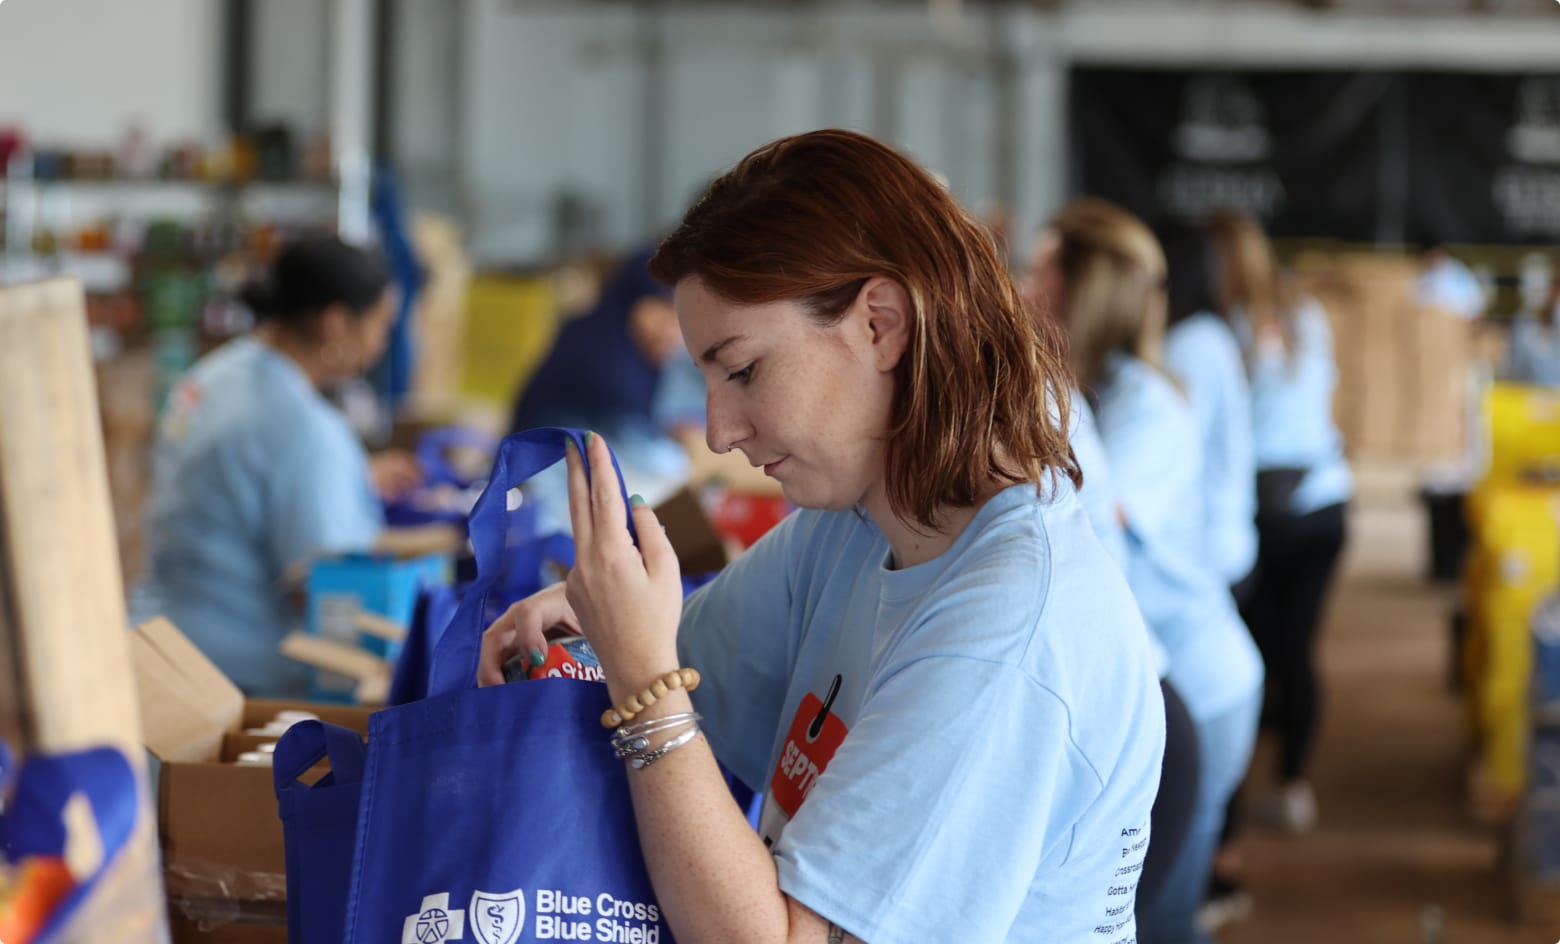 A BCBSRI volunteer packing food into a Blue Cross Blue Shield of RI branded reusable bag.